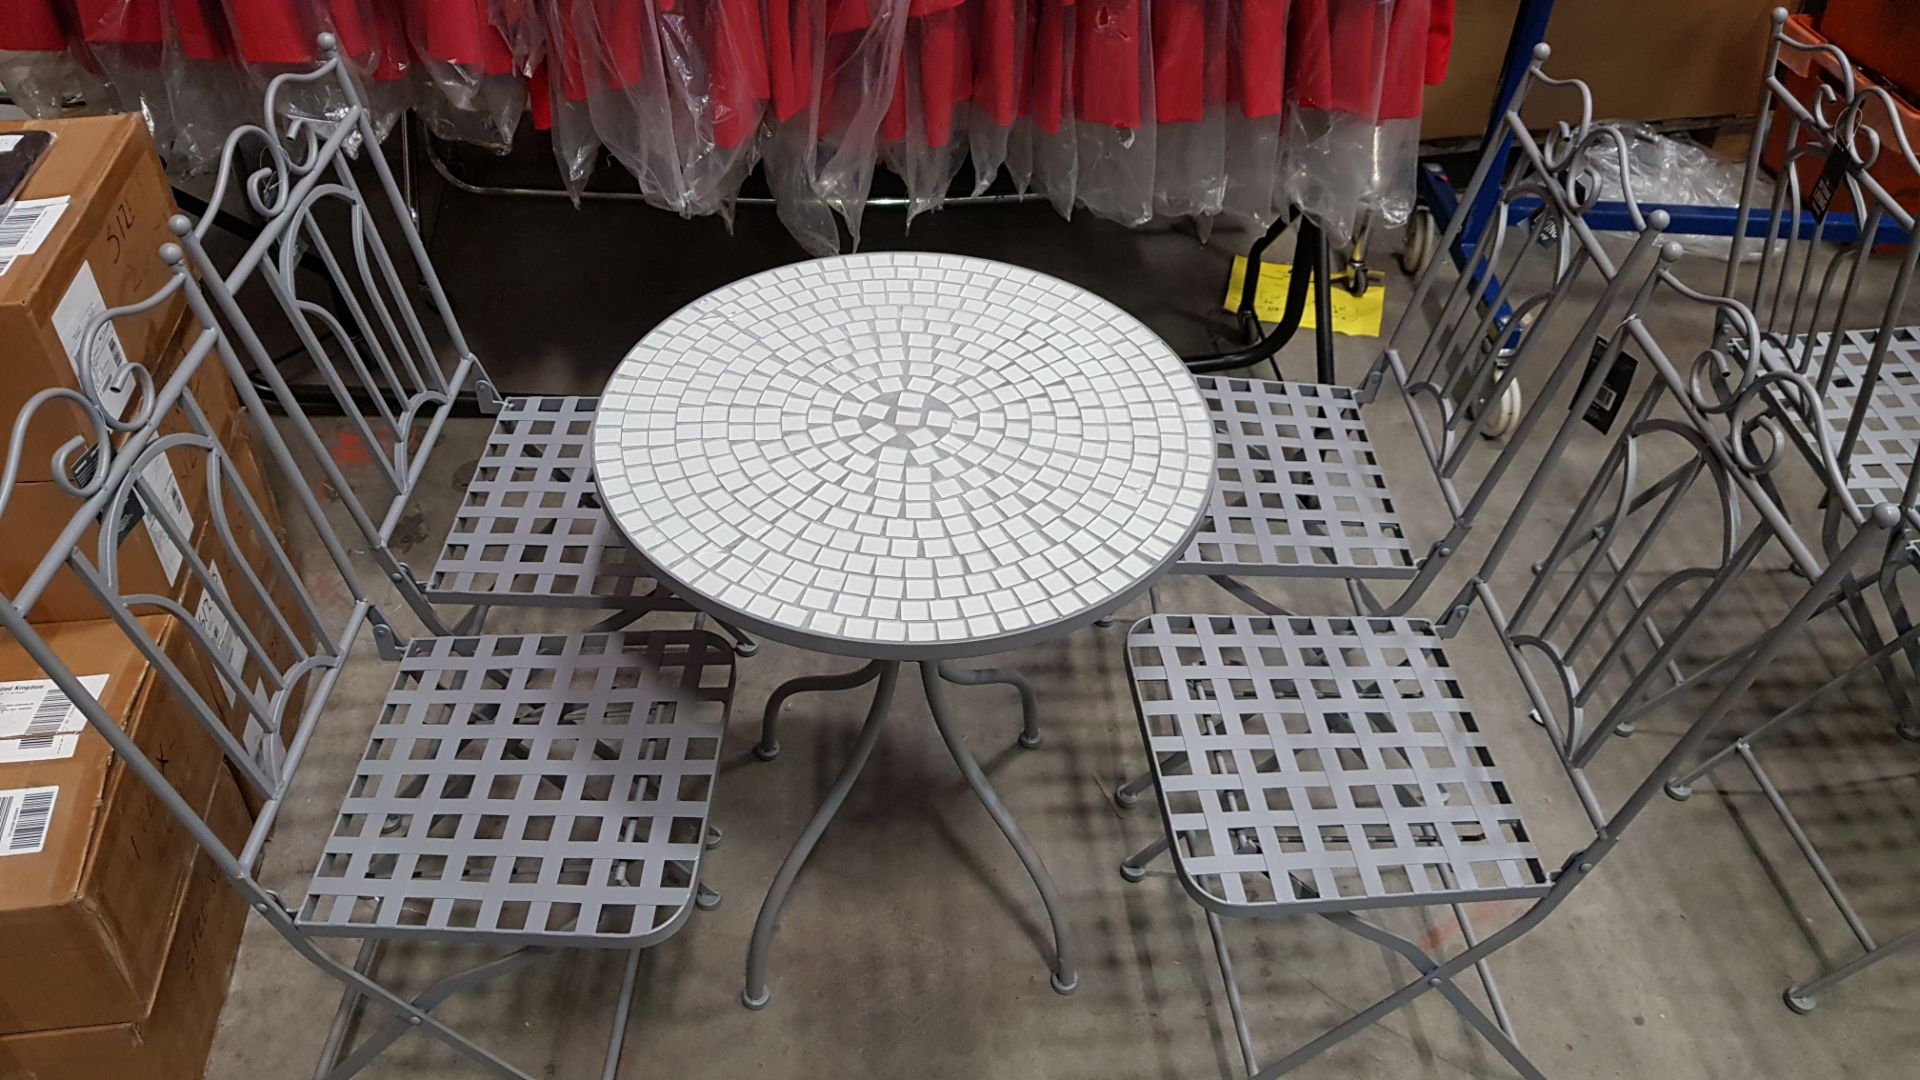 1 X SILVER MOSAIC BISTRO / GARDEN TABLE & 4 CHAIRS SET - SAMPLE (NOTE FEW CRACKS IN THE MOSAIC BUT